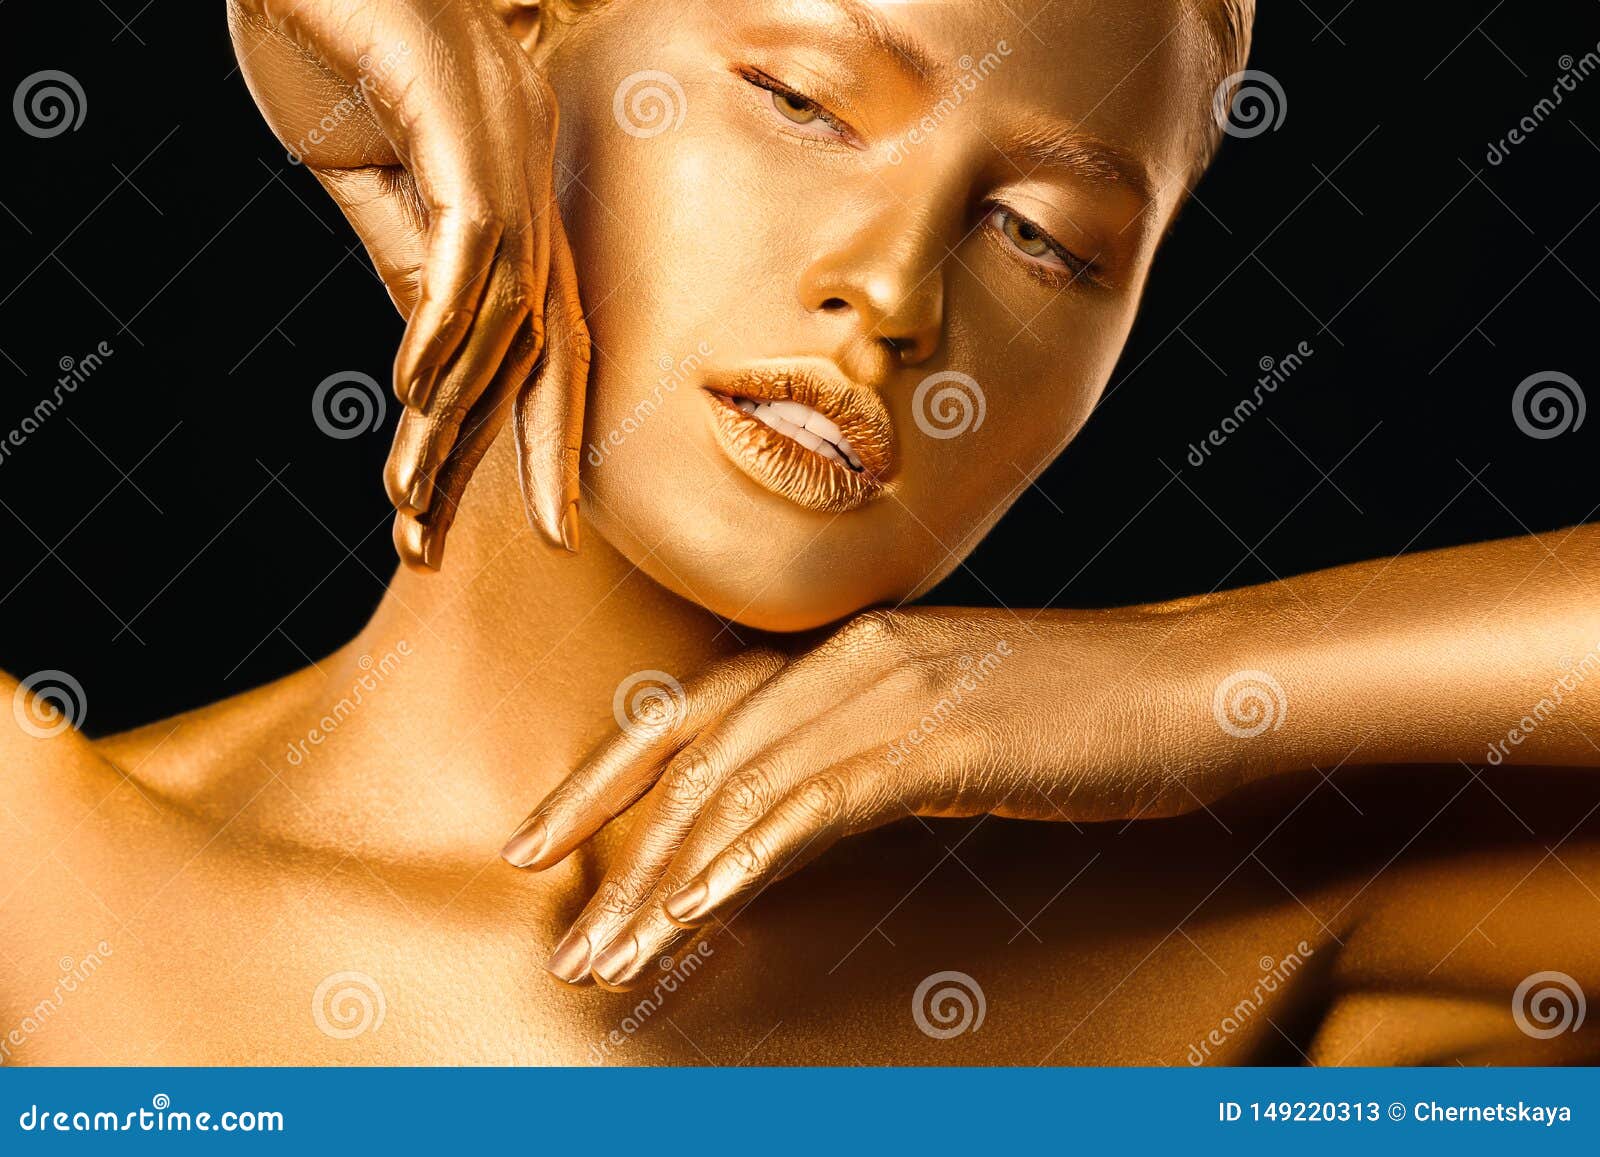 Gold Painted Woman Stock Photos and Pictures - 28,772 Images